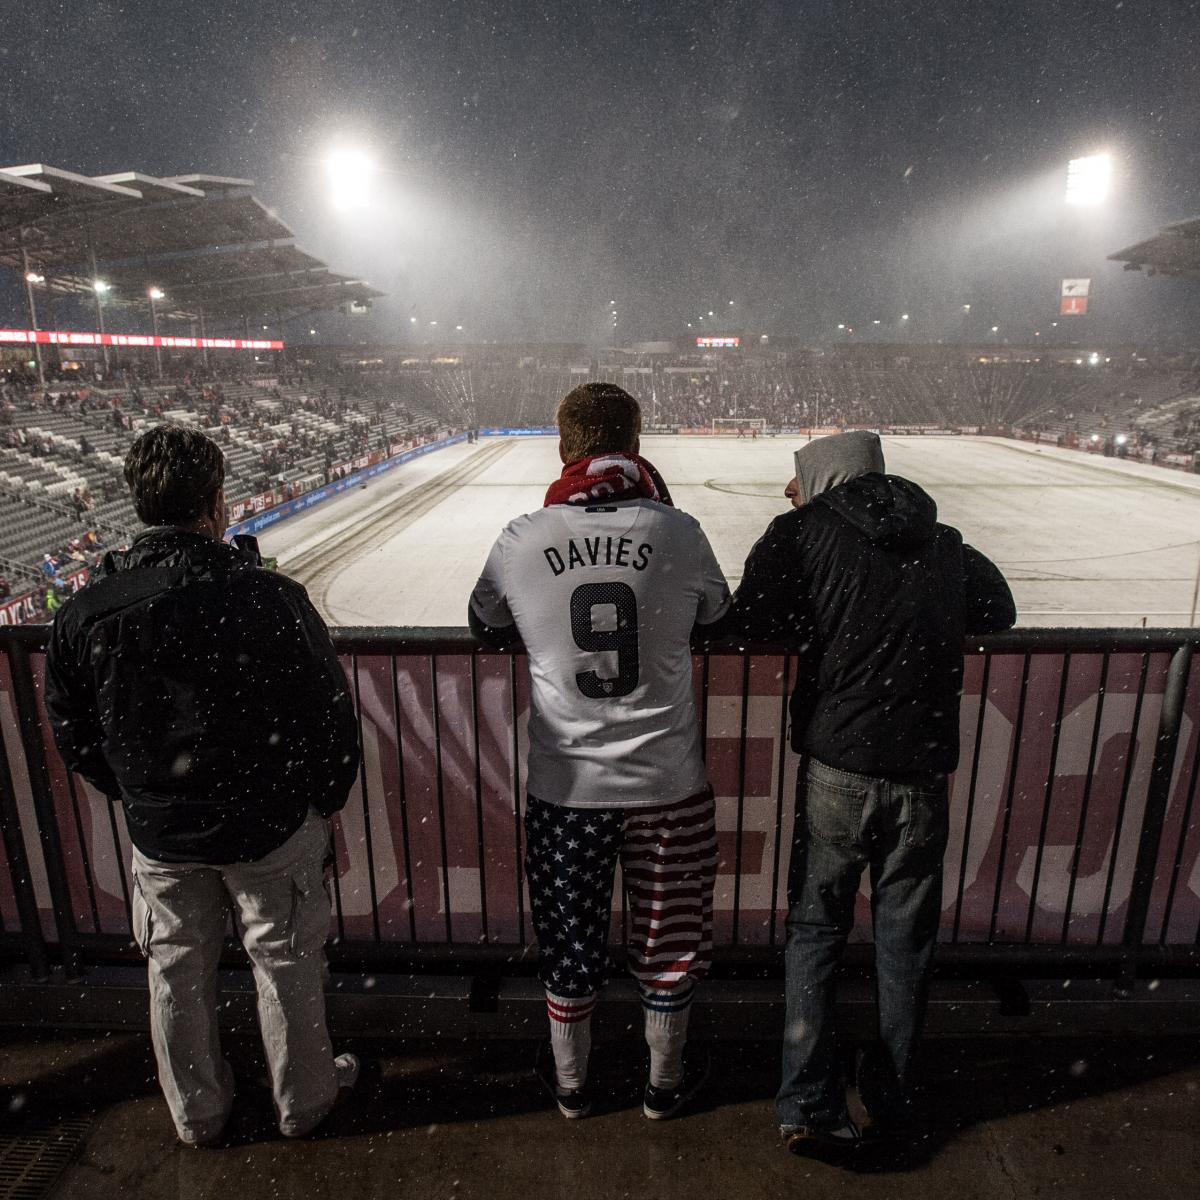 USA vs. Costa Rica Photo Gallery: Snow Falls as USMNT Win in Wintry